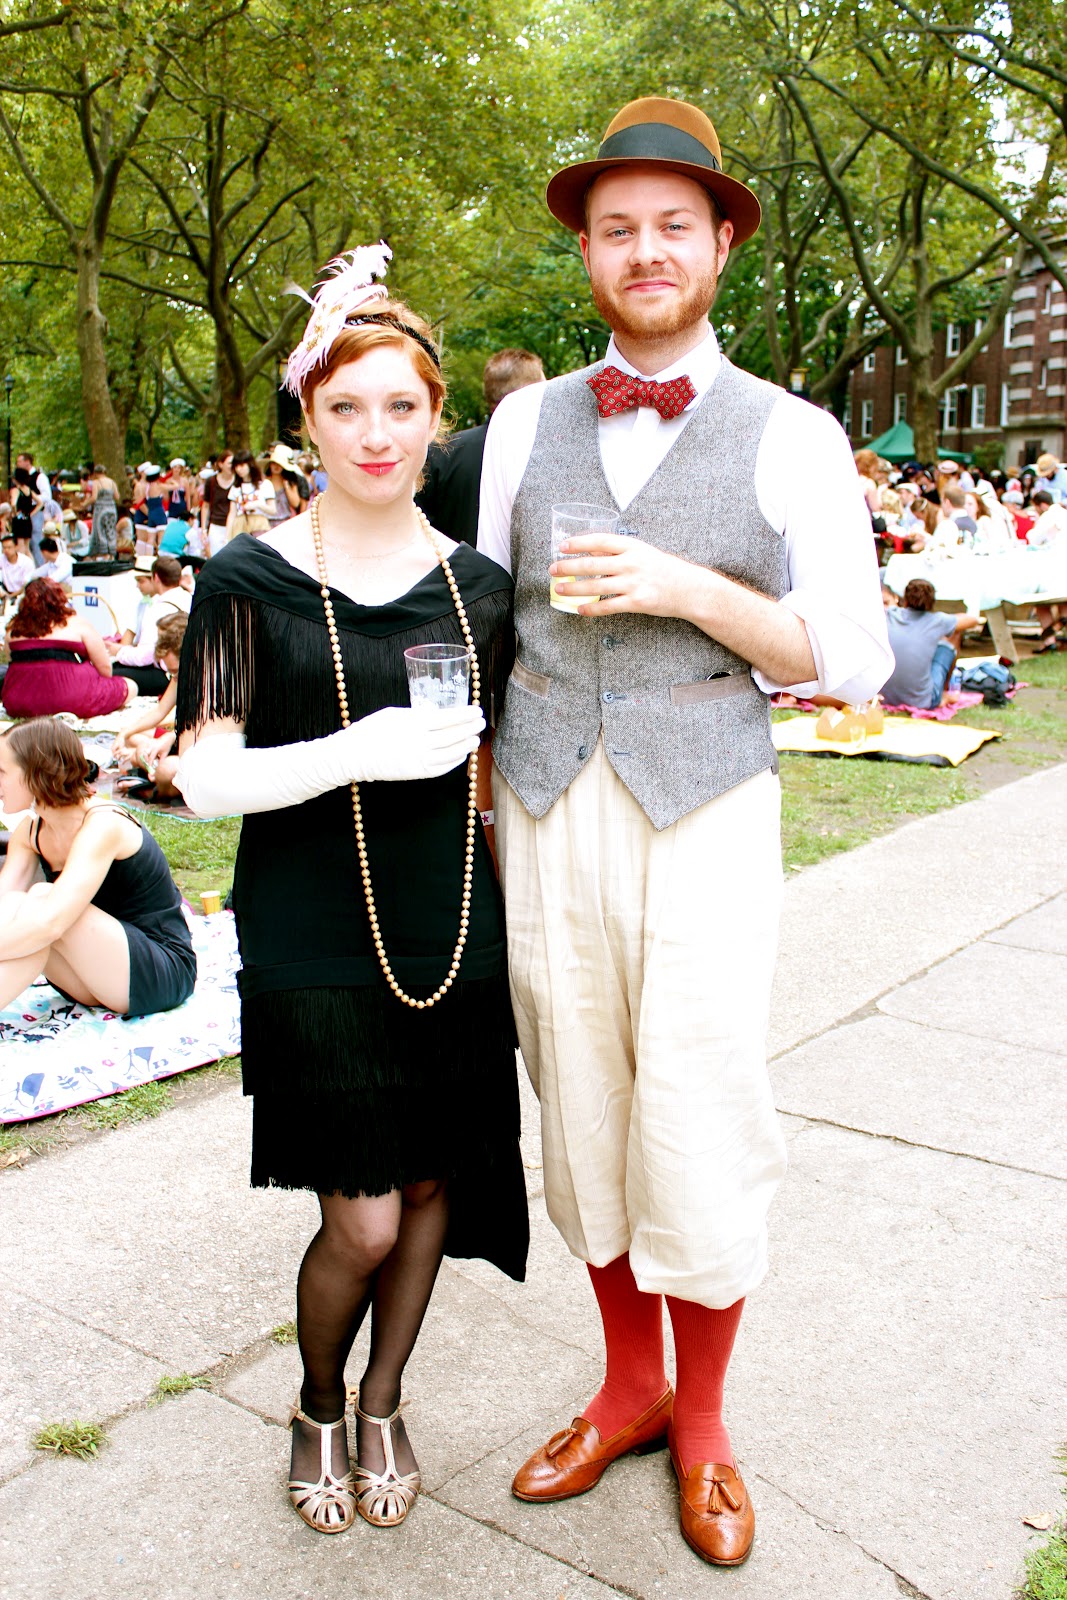 The Style Climber: 7th Annual Jazz Age Lawn Party